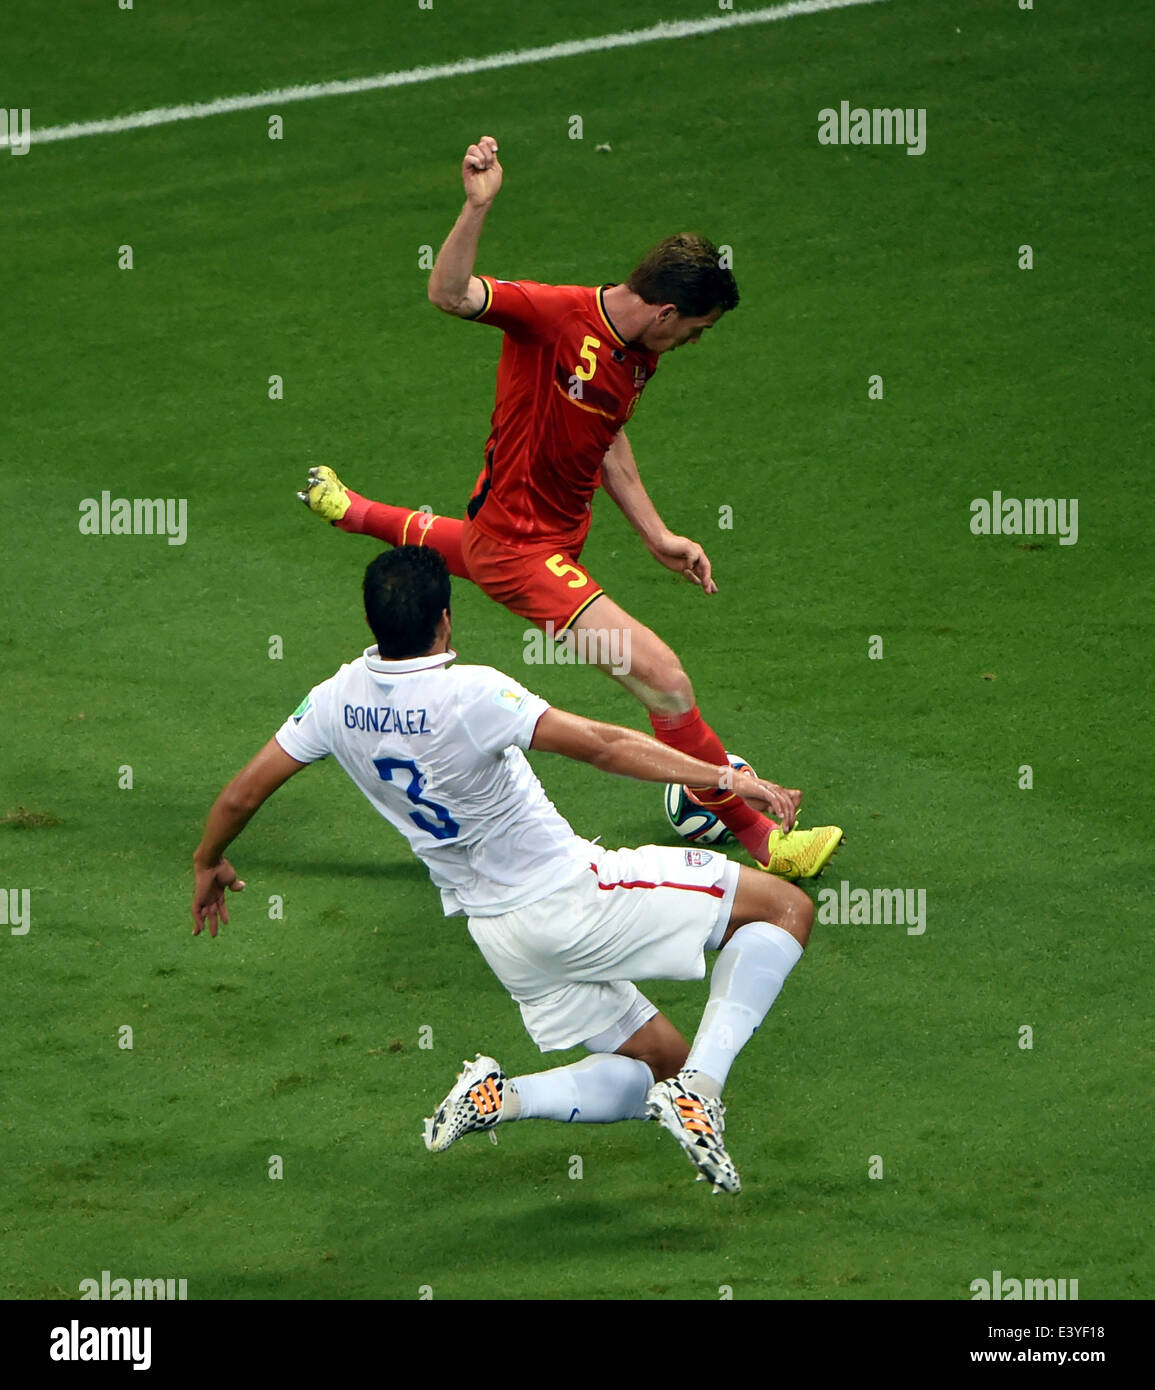 Salvador, Brazil. 1st July, 2014. Omar Gonzalez of the U.S. defends against Belgium's Jan Vertonghen (up) during a Round of 16 match between Belgium and the U.S. of 2014 FIFA World Cup at the Arena Fonte Nova Stadium in Salvador, Brazil, on July 1, 2014. Credit:  Guo Yong/Xinhua/Alamy Live News Stock Photo